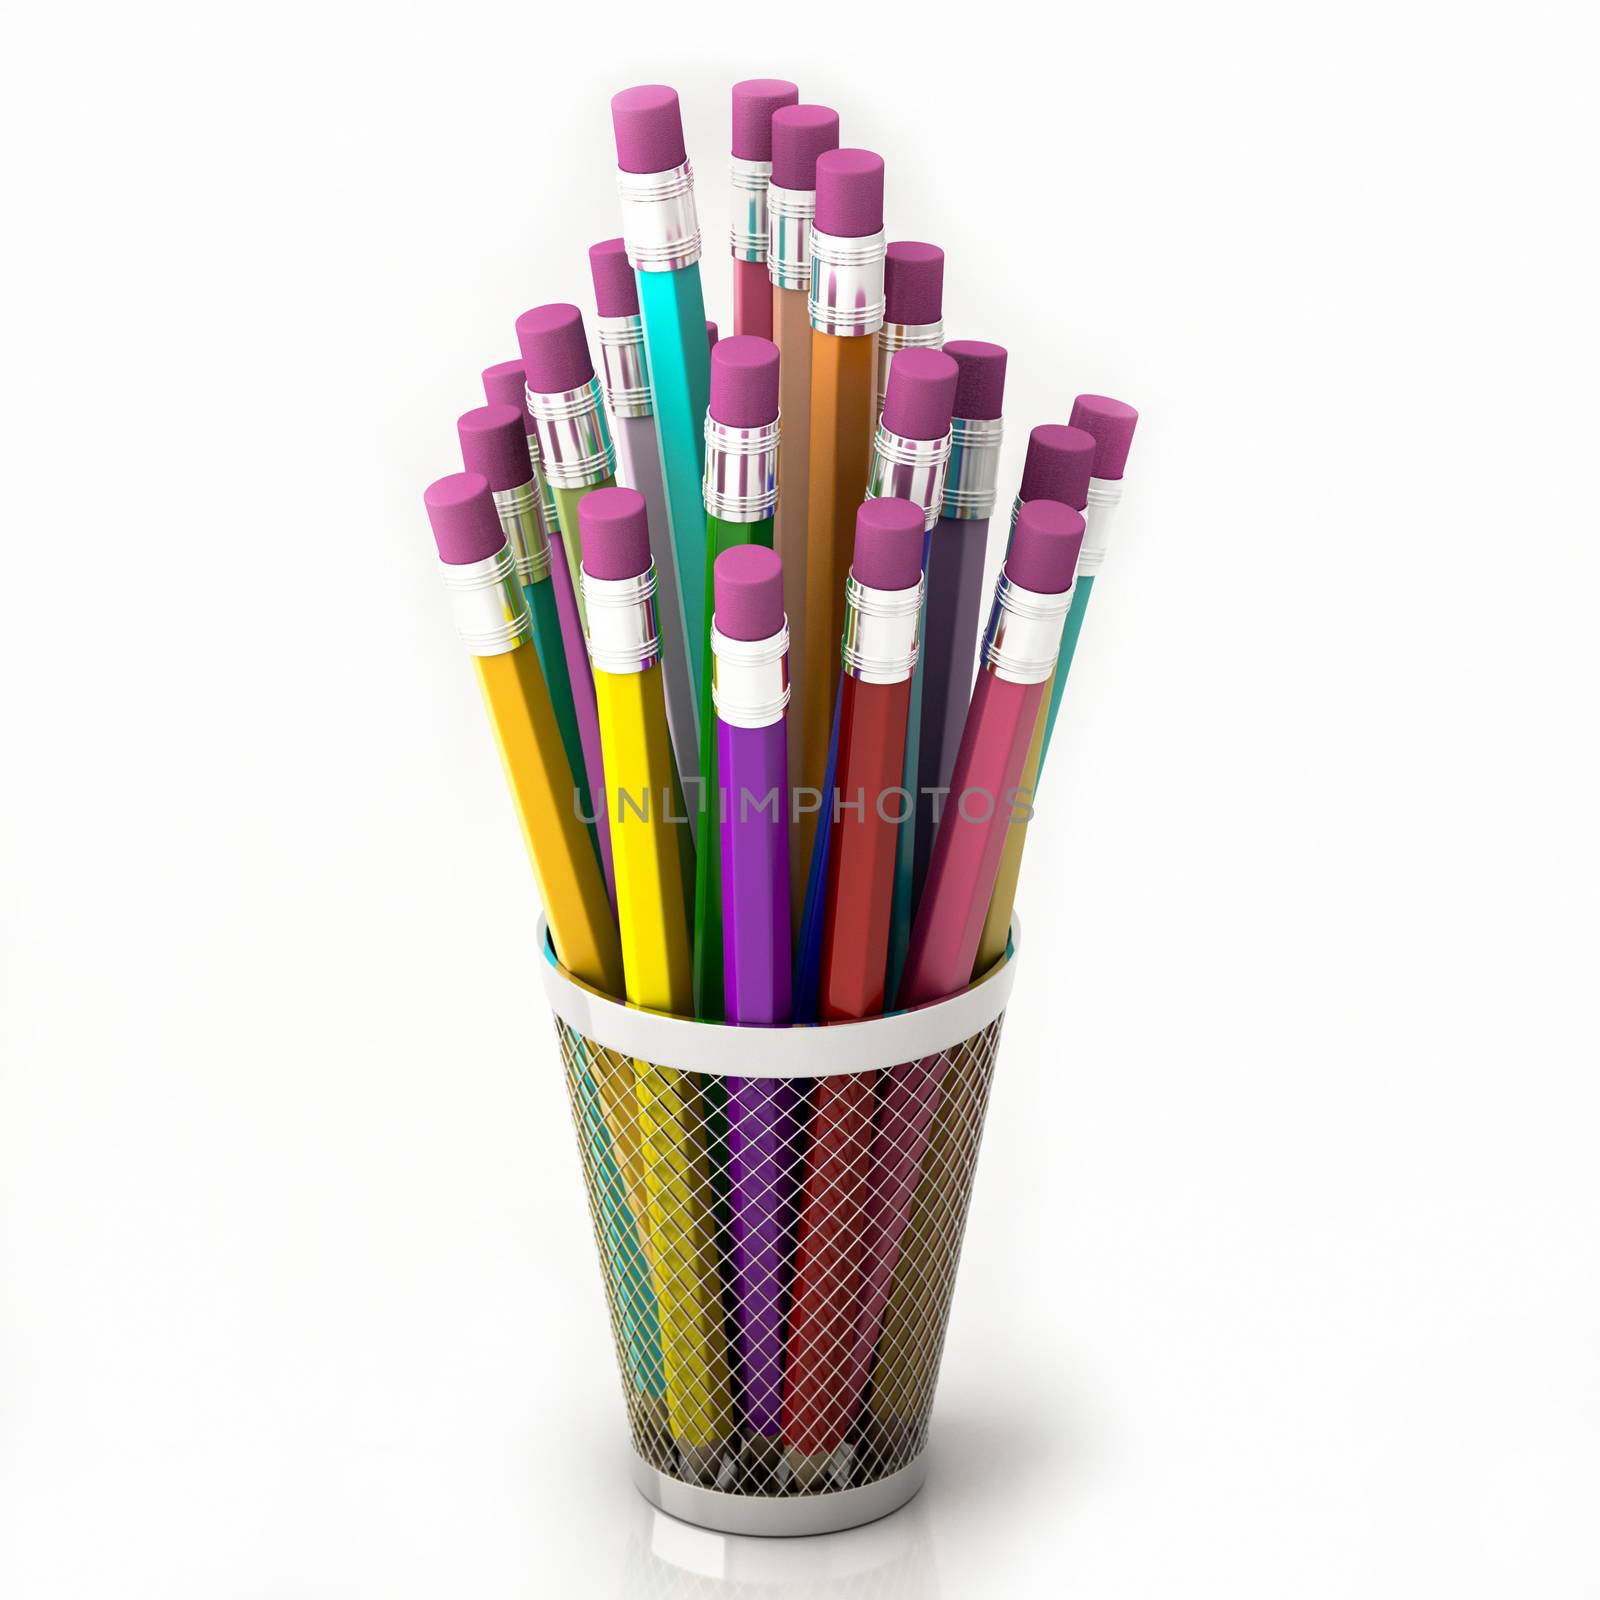 colored pencils in basket isolated on white background 3d illustration